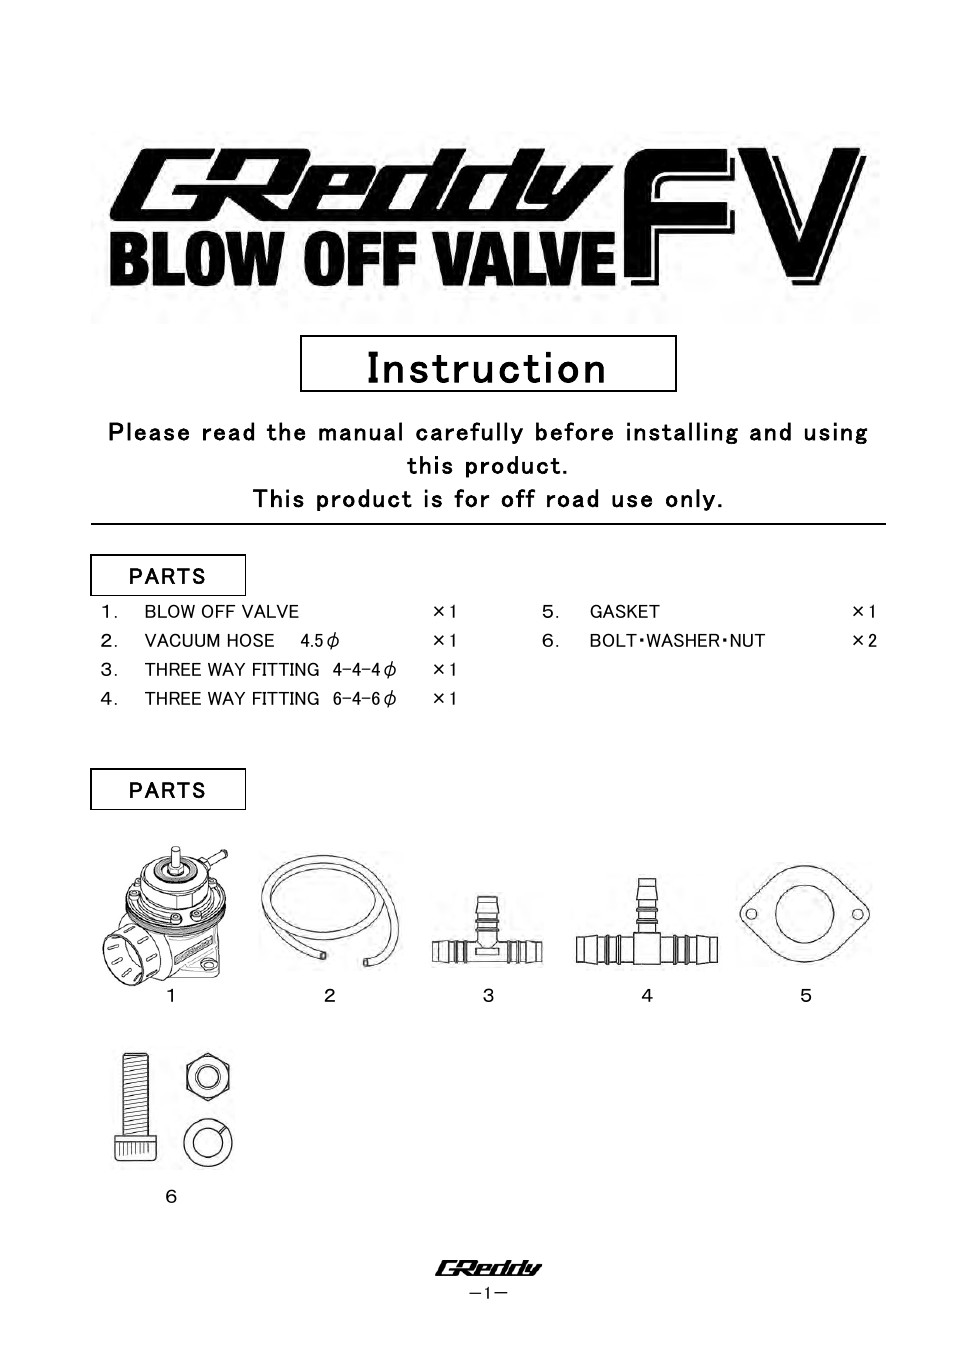 TURBO RELATED: Blow Off Valve Type FV